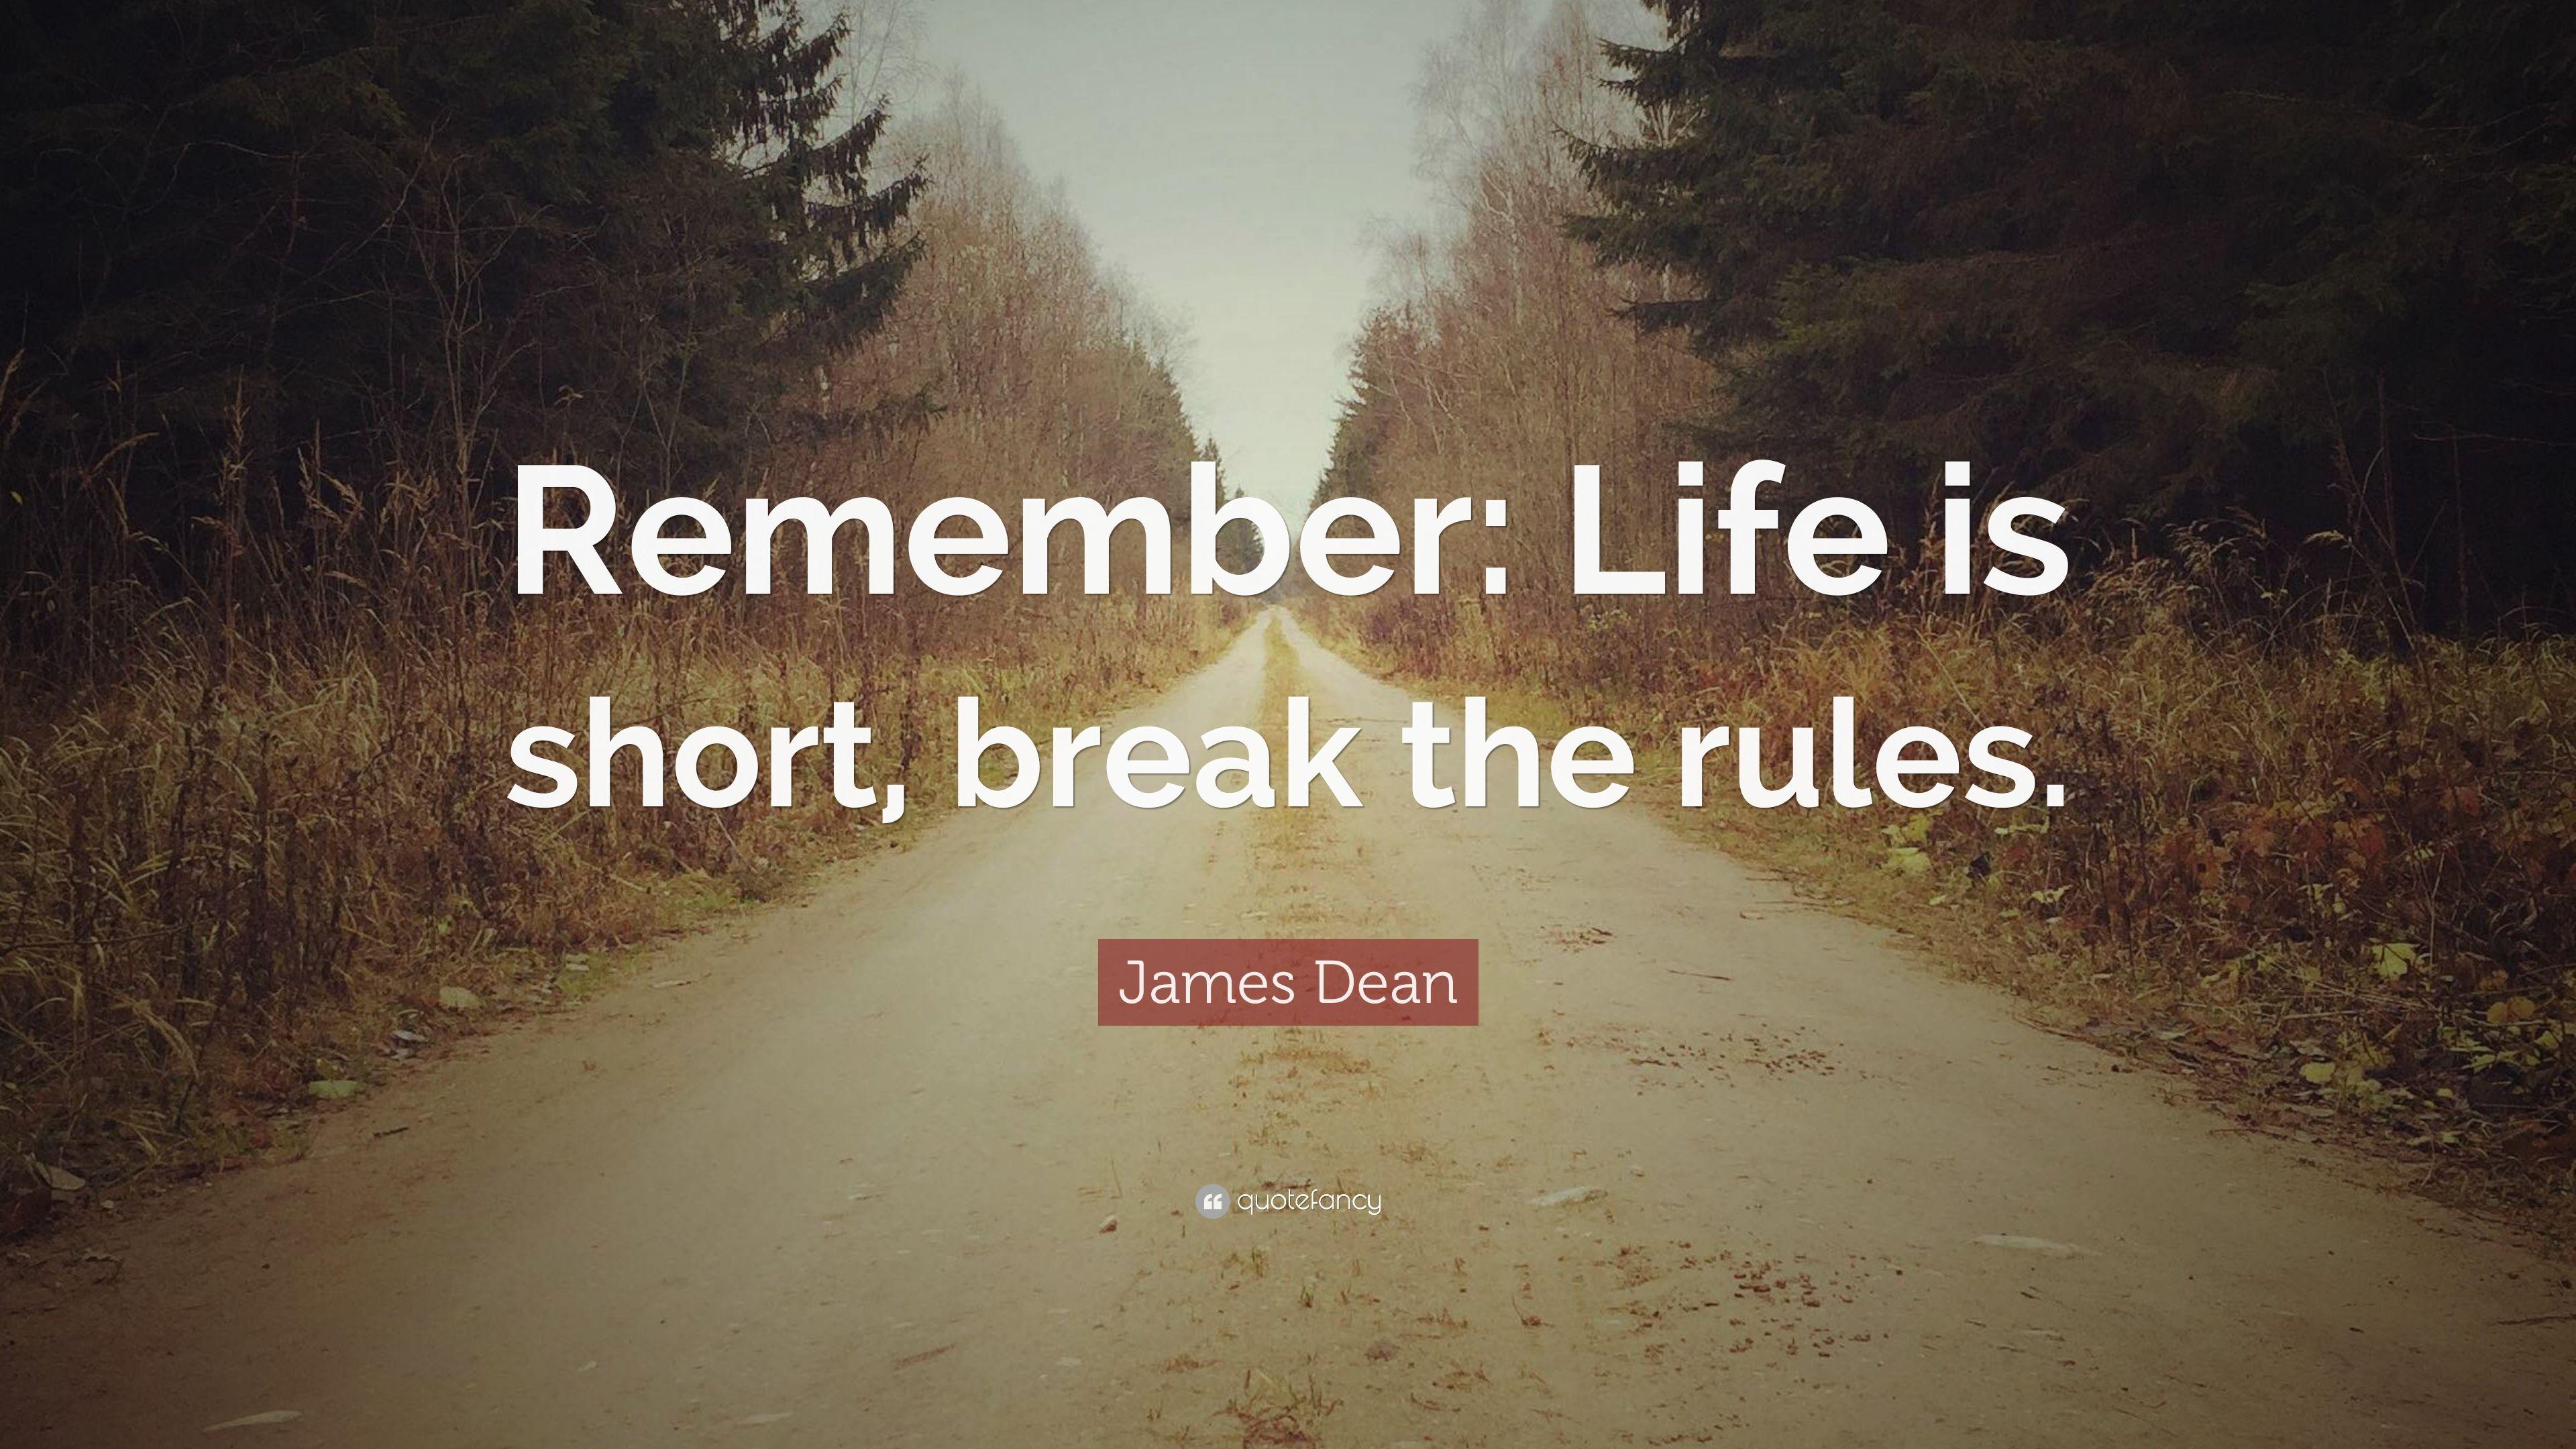 James Dean Quote: “Remember: Life is short, break the rules.” 12